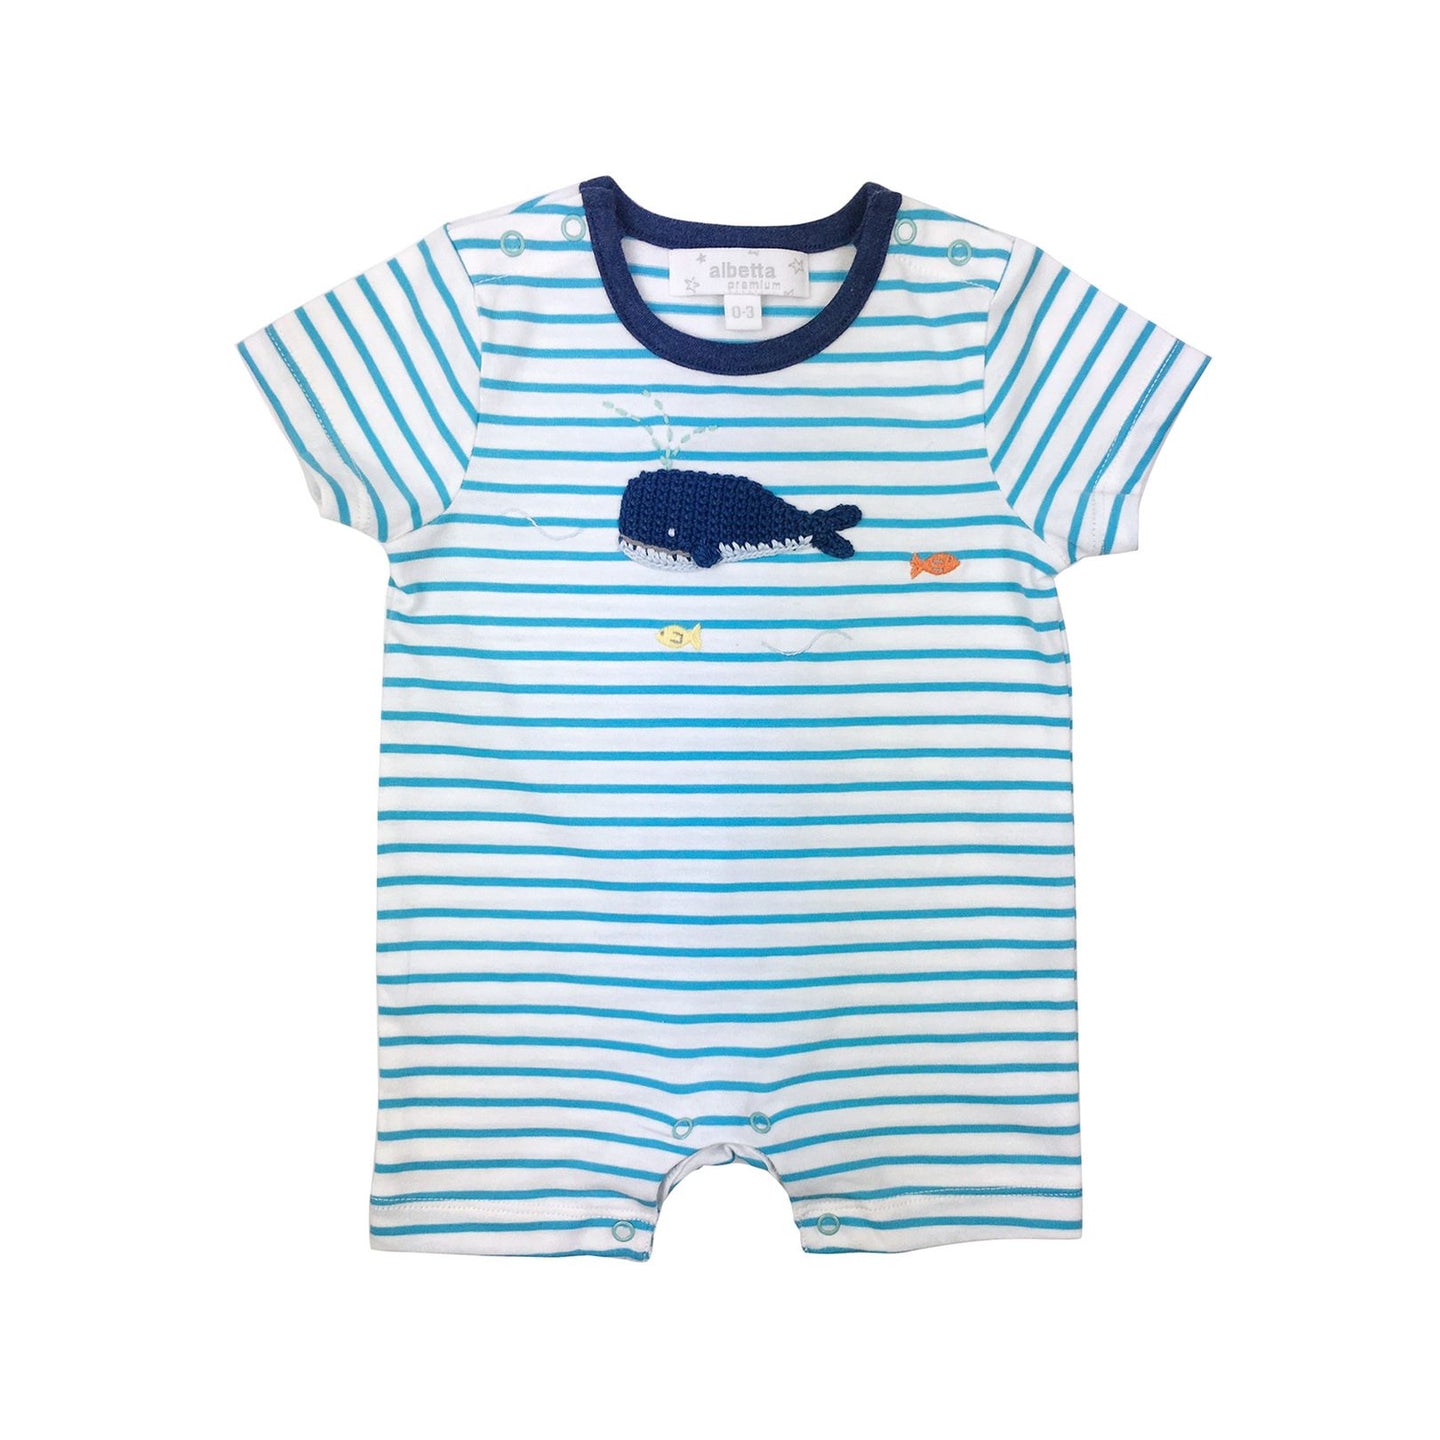 Whale Baby Outfit & Rattle